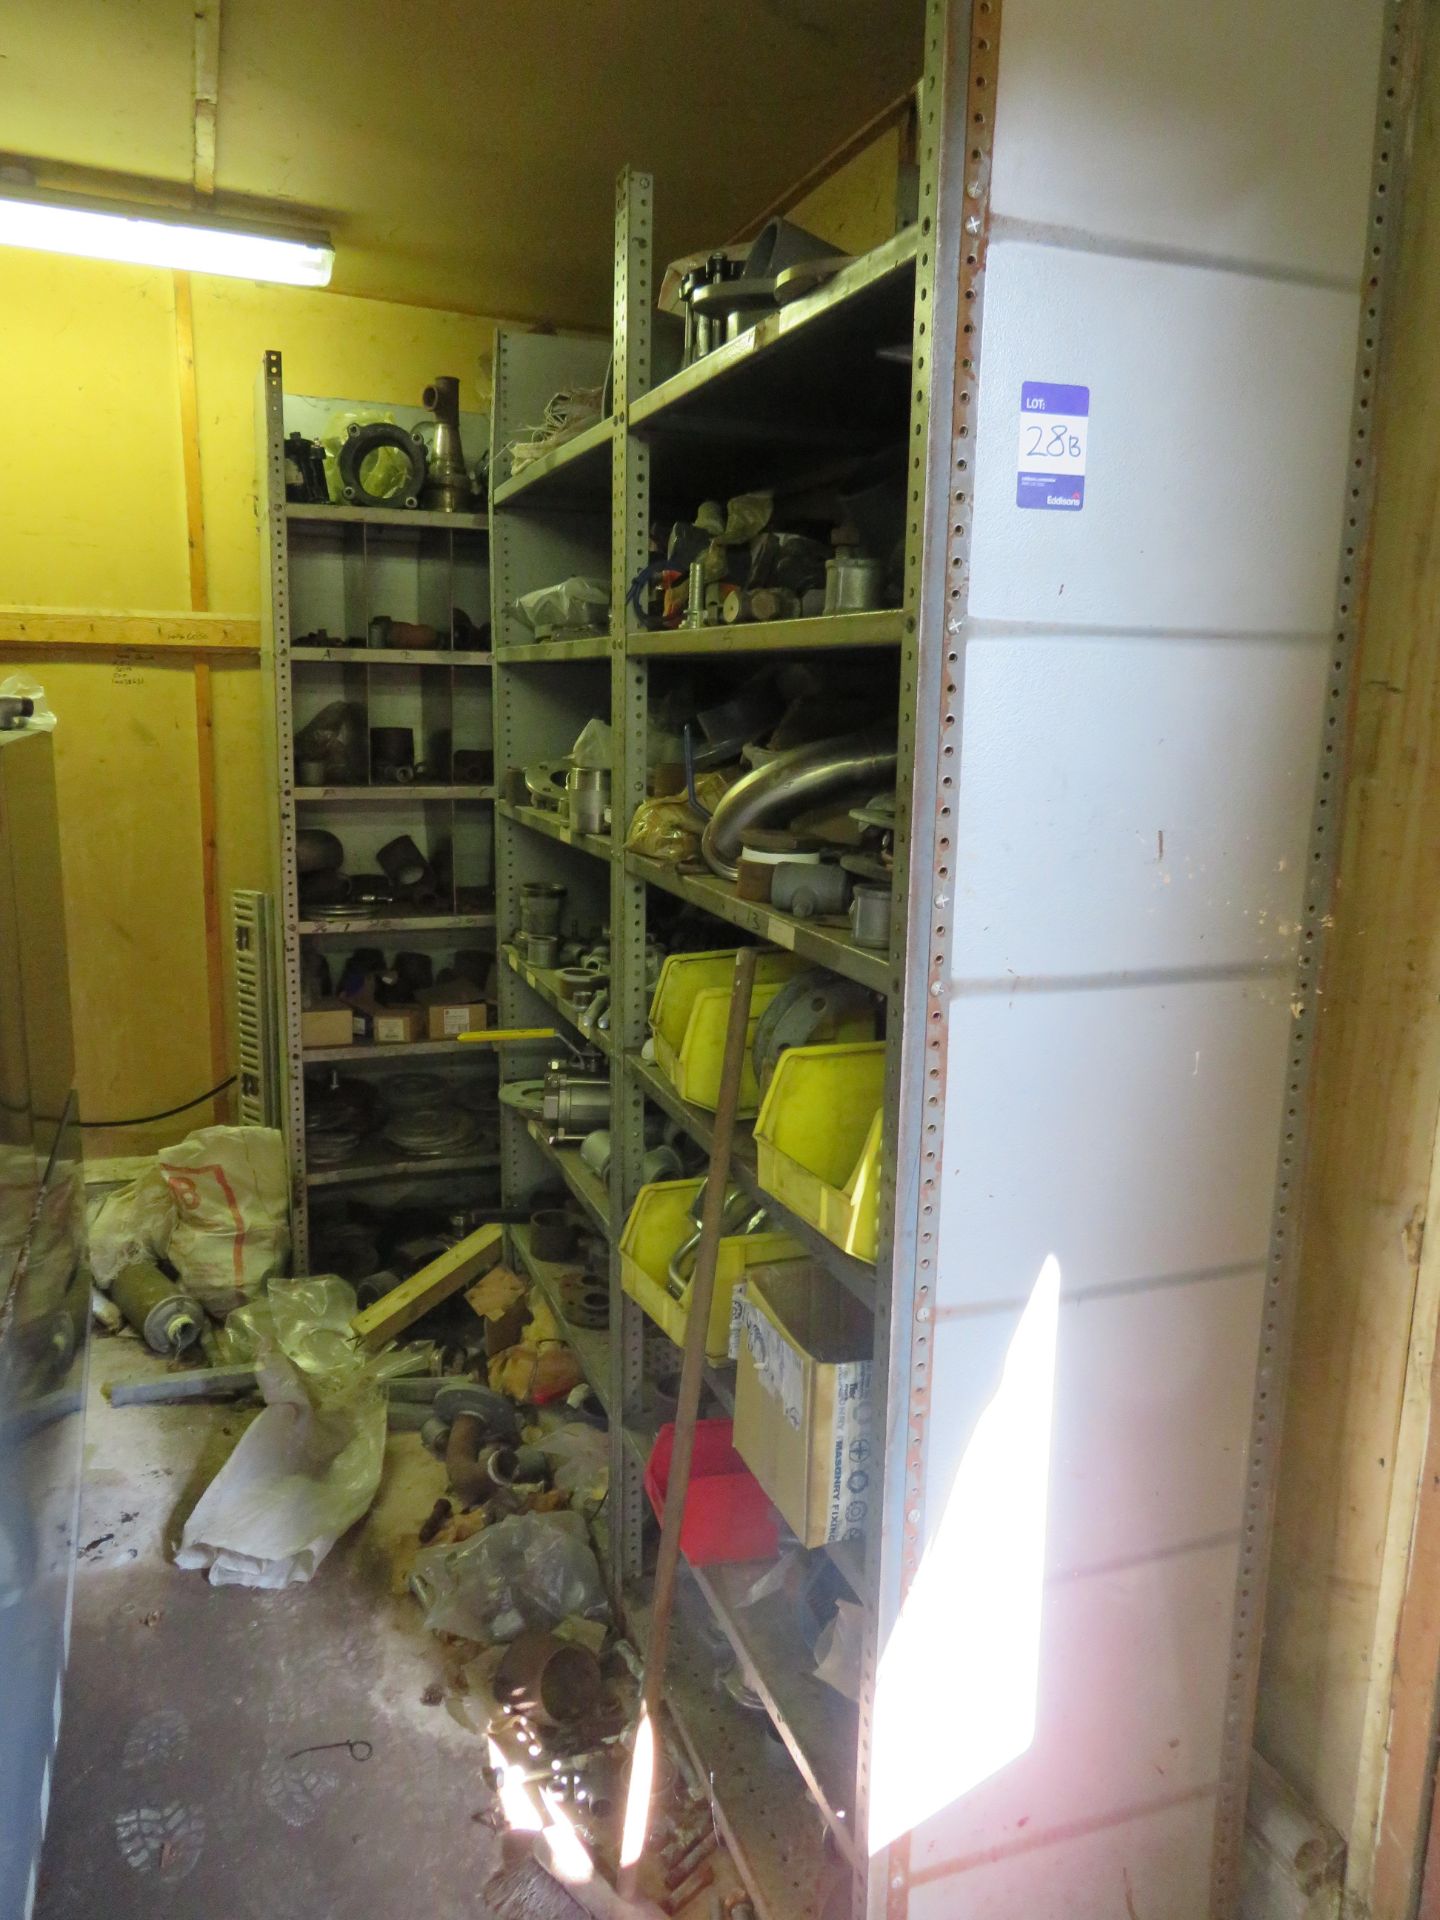 Contents of shelves & pallet pipe spares, plates,